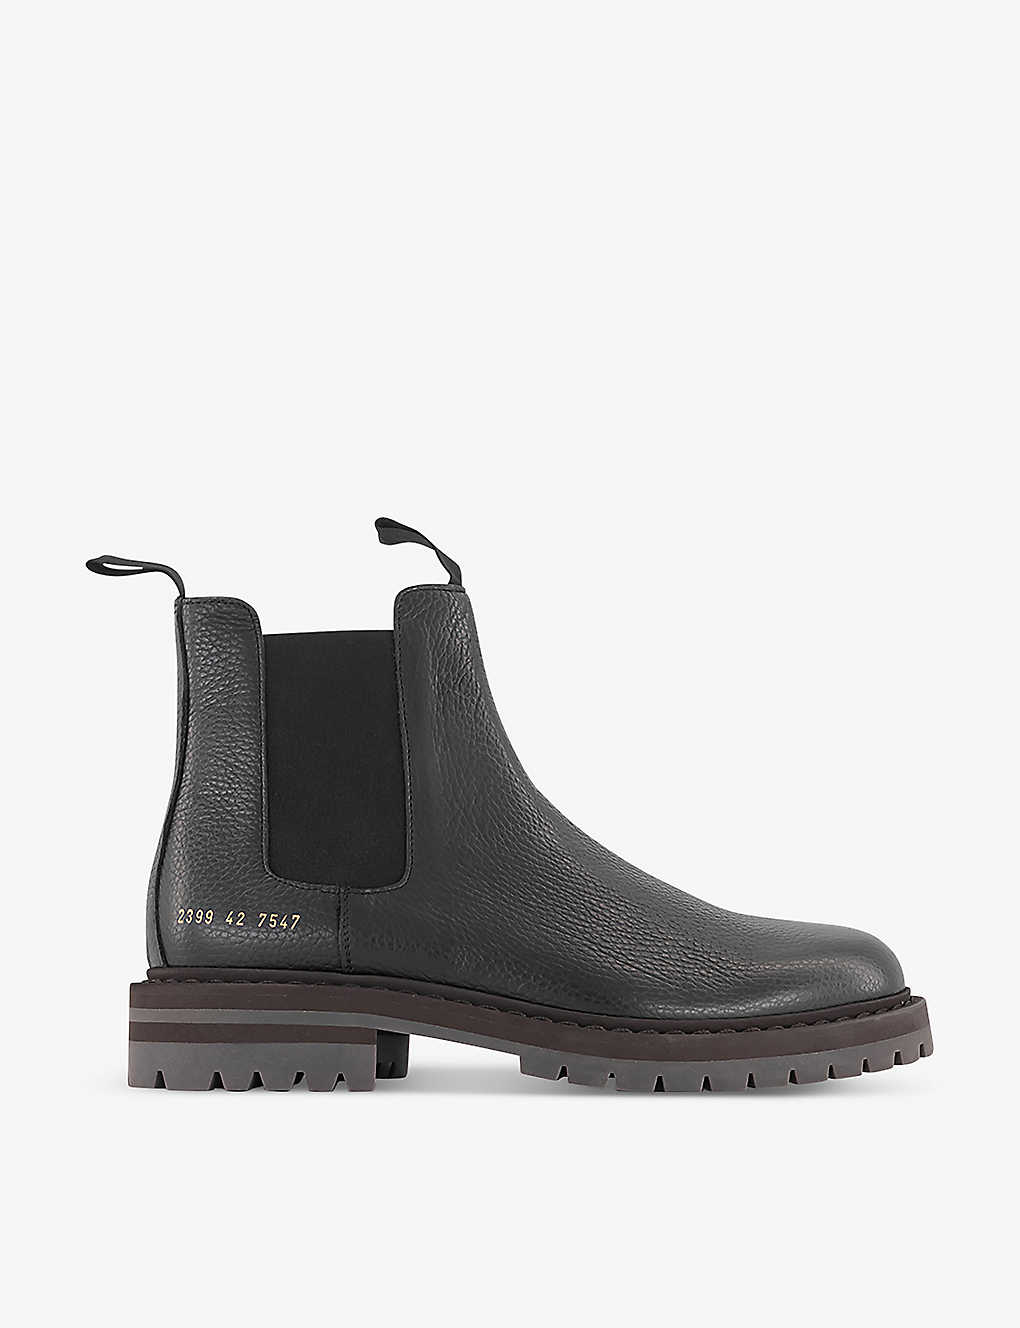 COMMON PROJECTS COMMON PROJECTS MEN'S BLACK SUEDE CHELSEA BOOTS